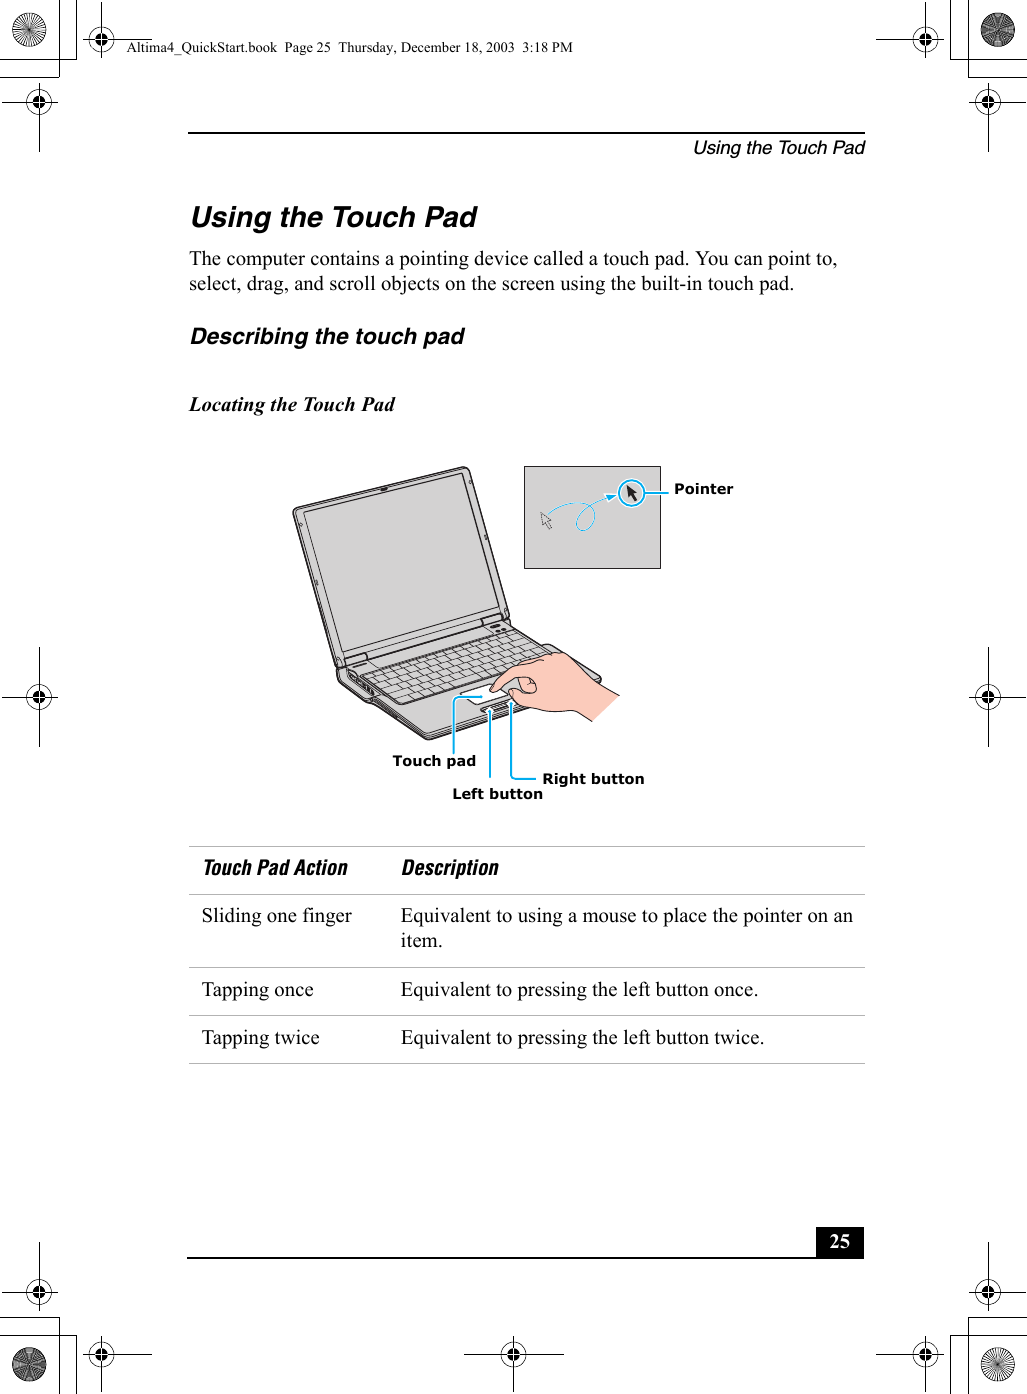 Using the Touch Pad25Using the Touch PadThe computer contains a pointing device called a touch pad. You can point to, select, drag, and scroll objects on the screen using the built-in touch pad.Describing the touch pad Locating the Touch PadTouch Pad Action DescriptionSliding one finger Equivalent to using a mouse to place the pointer on an item.Tapping once Equivalent to pressing the left button once.Tapping twice Equivalent to pressing the left button twice.Touch padLeft buttonRight buttonPointerAltima4_QuickStart.book  Page 25  Thursday, December 18, 2003  3:18 PM